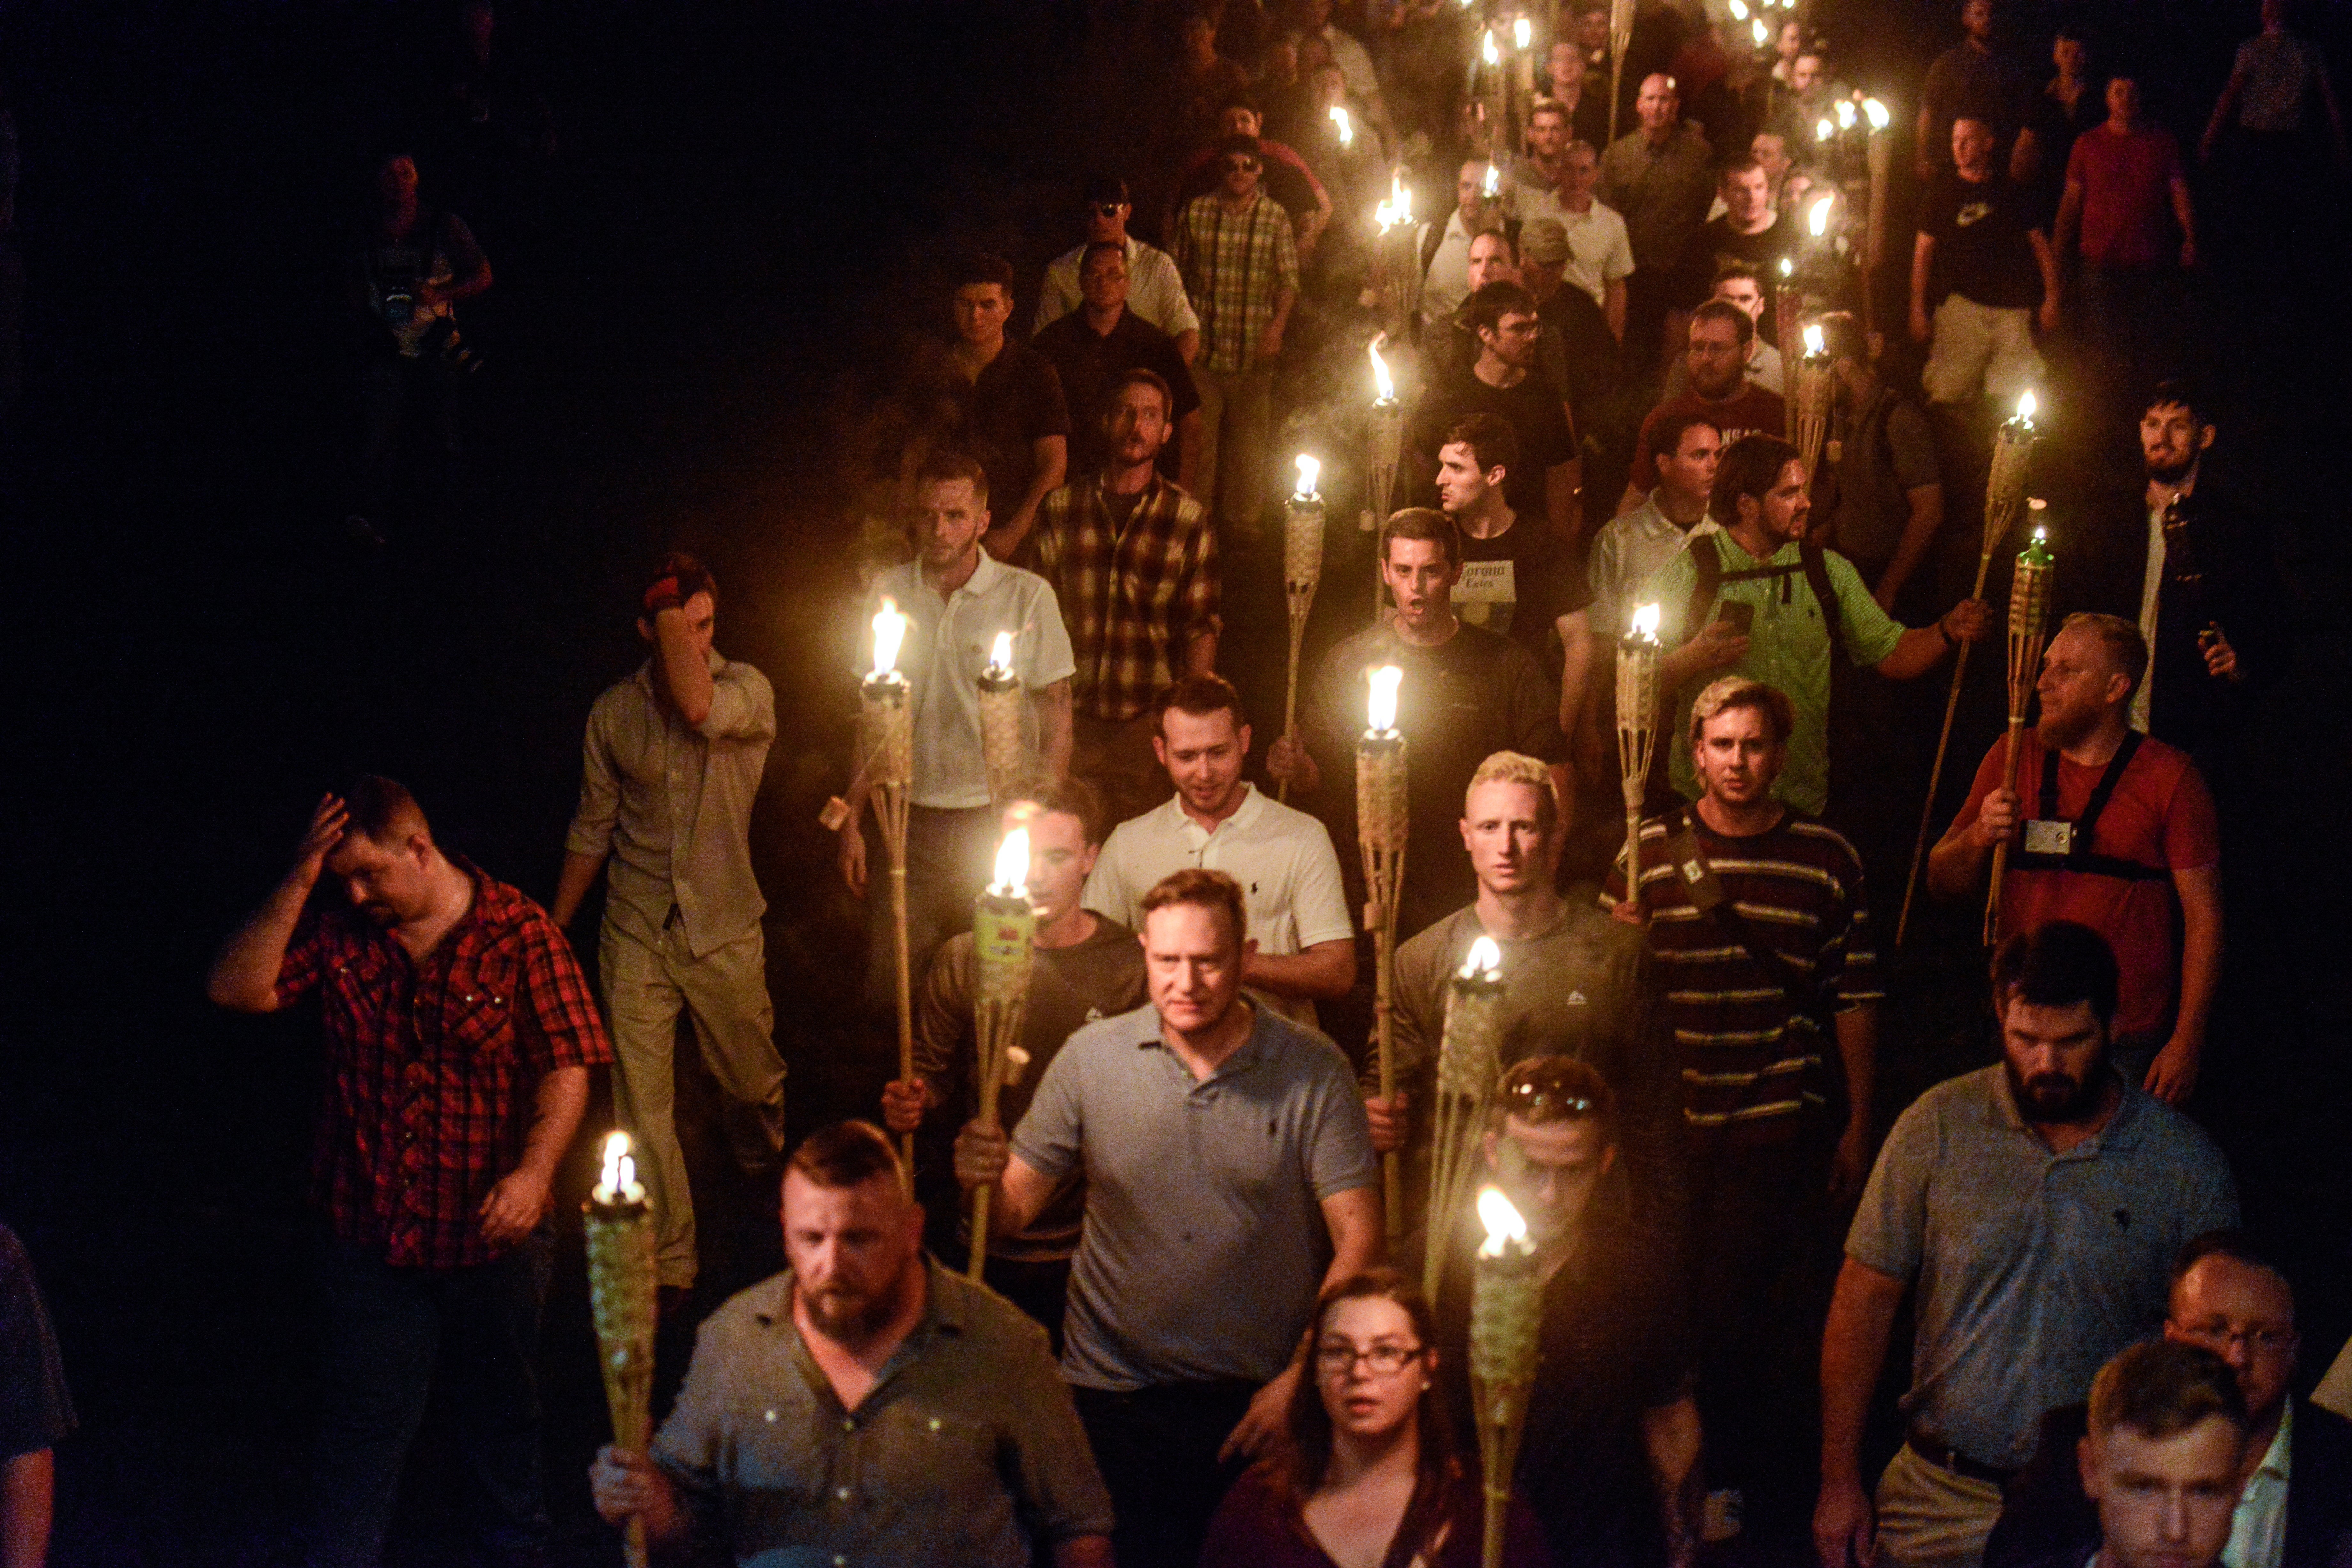 White supremacist demonstrators march with tiki torchers the night before the Unite the Right rally in Charlottesville, VA in Aug 2017.